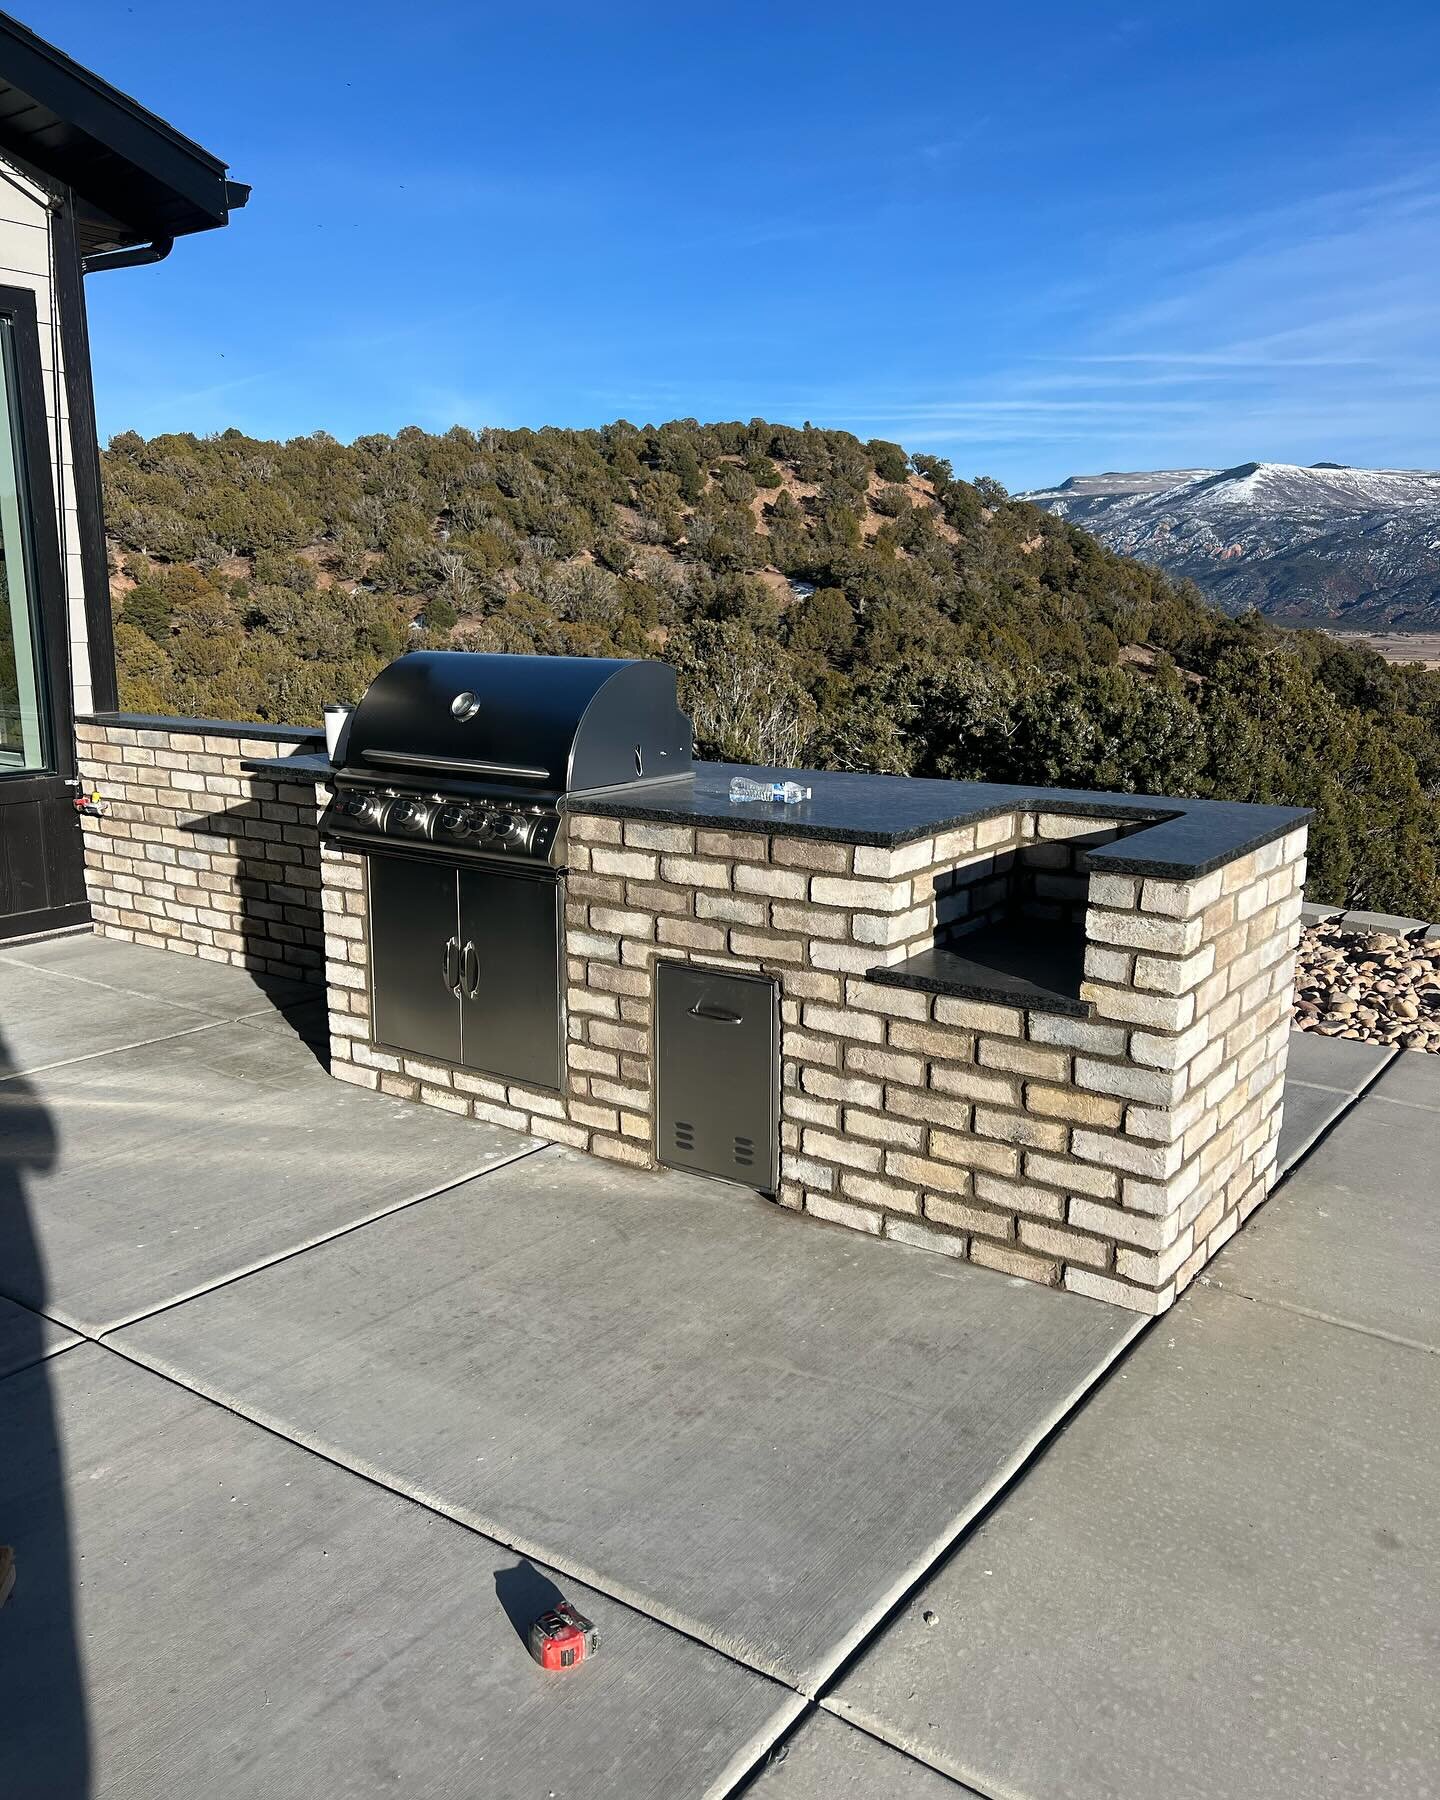 Embracing the charm of Southern Utah living with an outdoor BBQ masterpiece! 🌞🍖 Our brickwork and masonry project is turning our backyard into a haven for good times and great food. #SouthernUtahLiving #OutdoorBBQ #MasonryMagic #BBQBliss #OutdoorLi